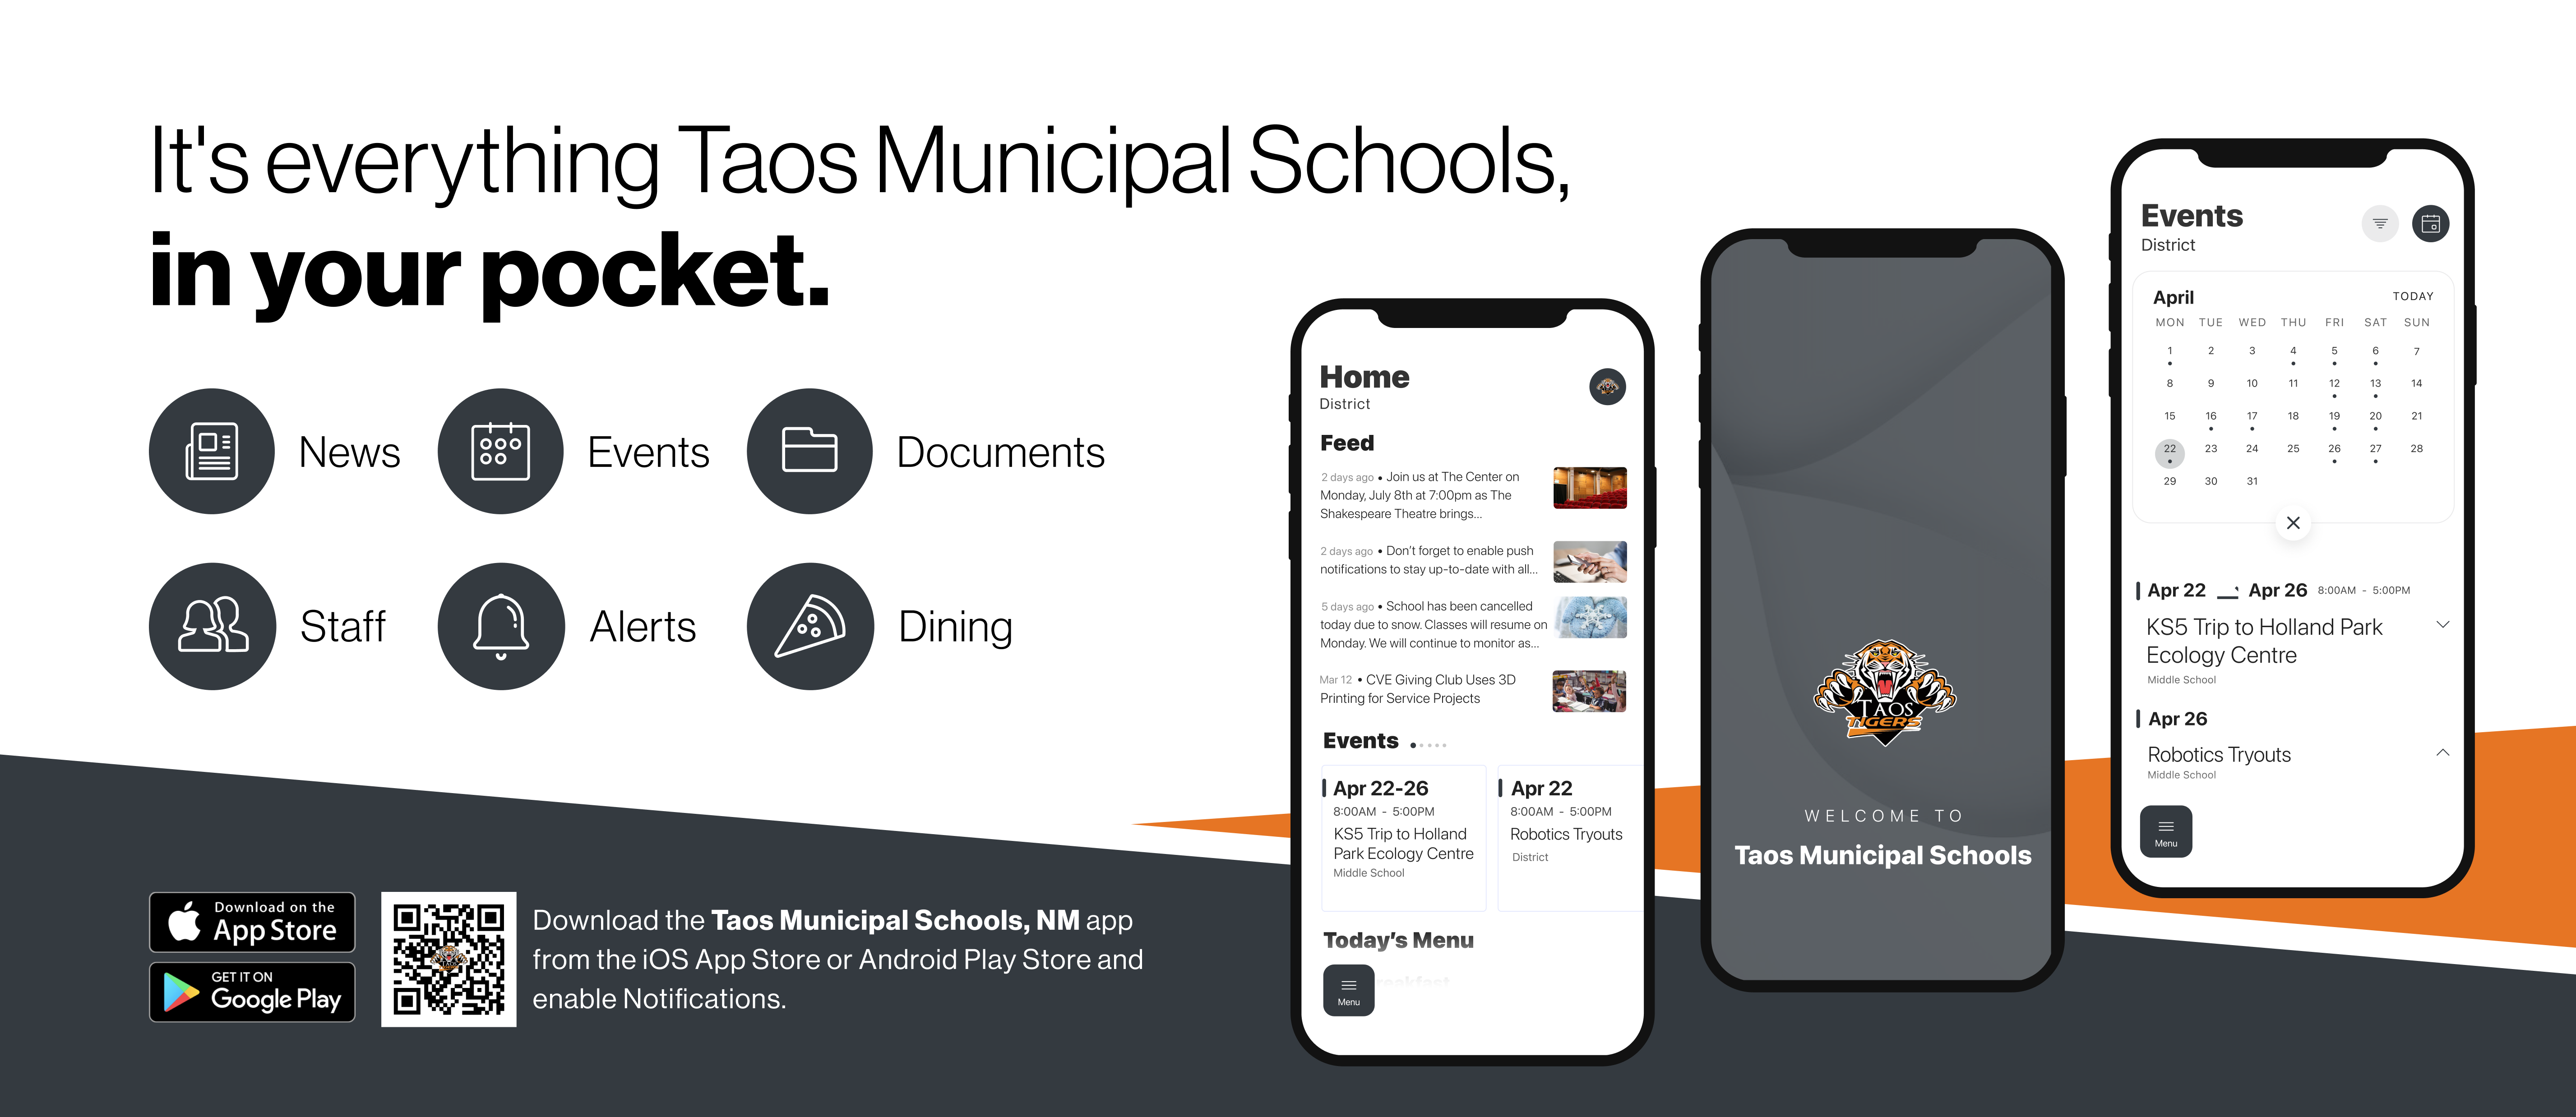 a graphic for the new Taos Municipal Schools mobile app! It's everything Taos Municipal Schools in your pocket. There's a QR code for download in the lower left